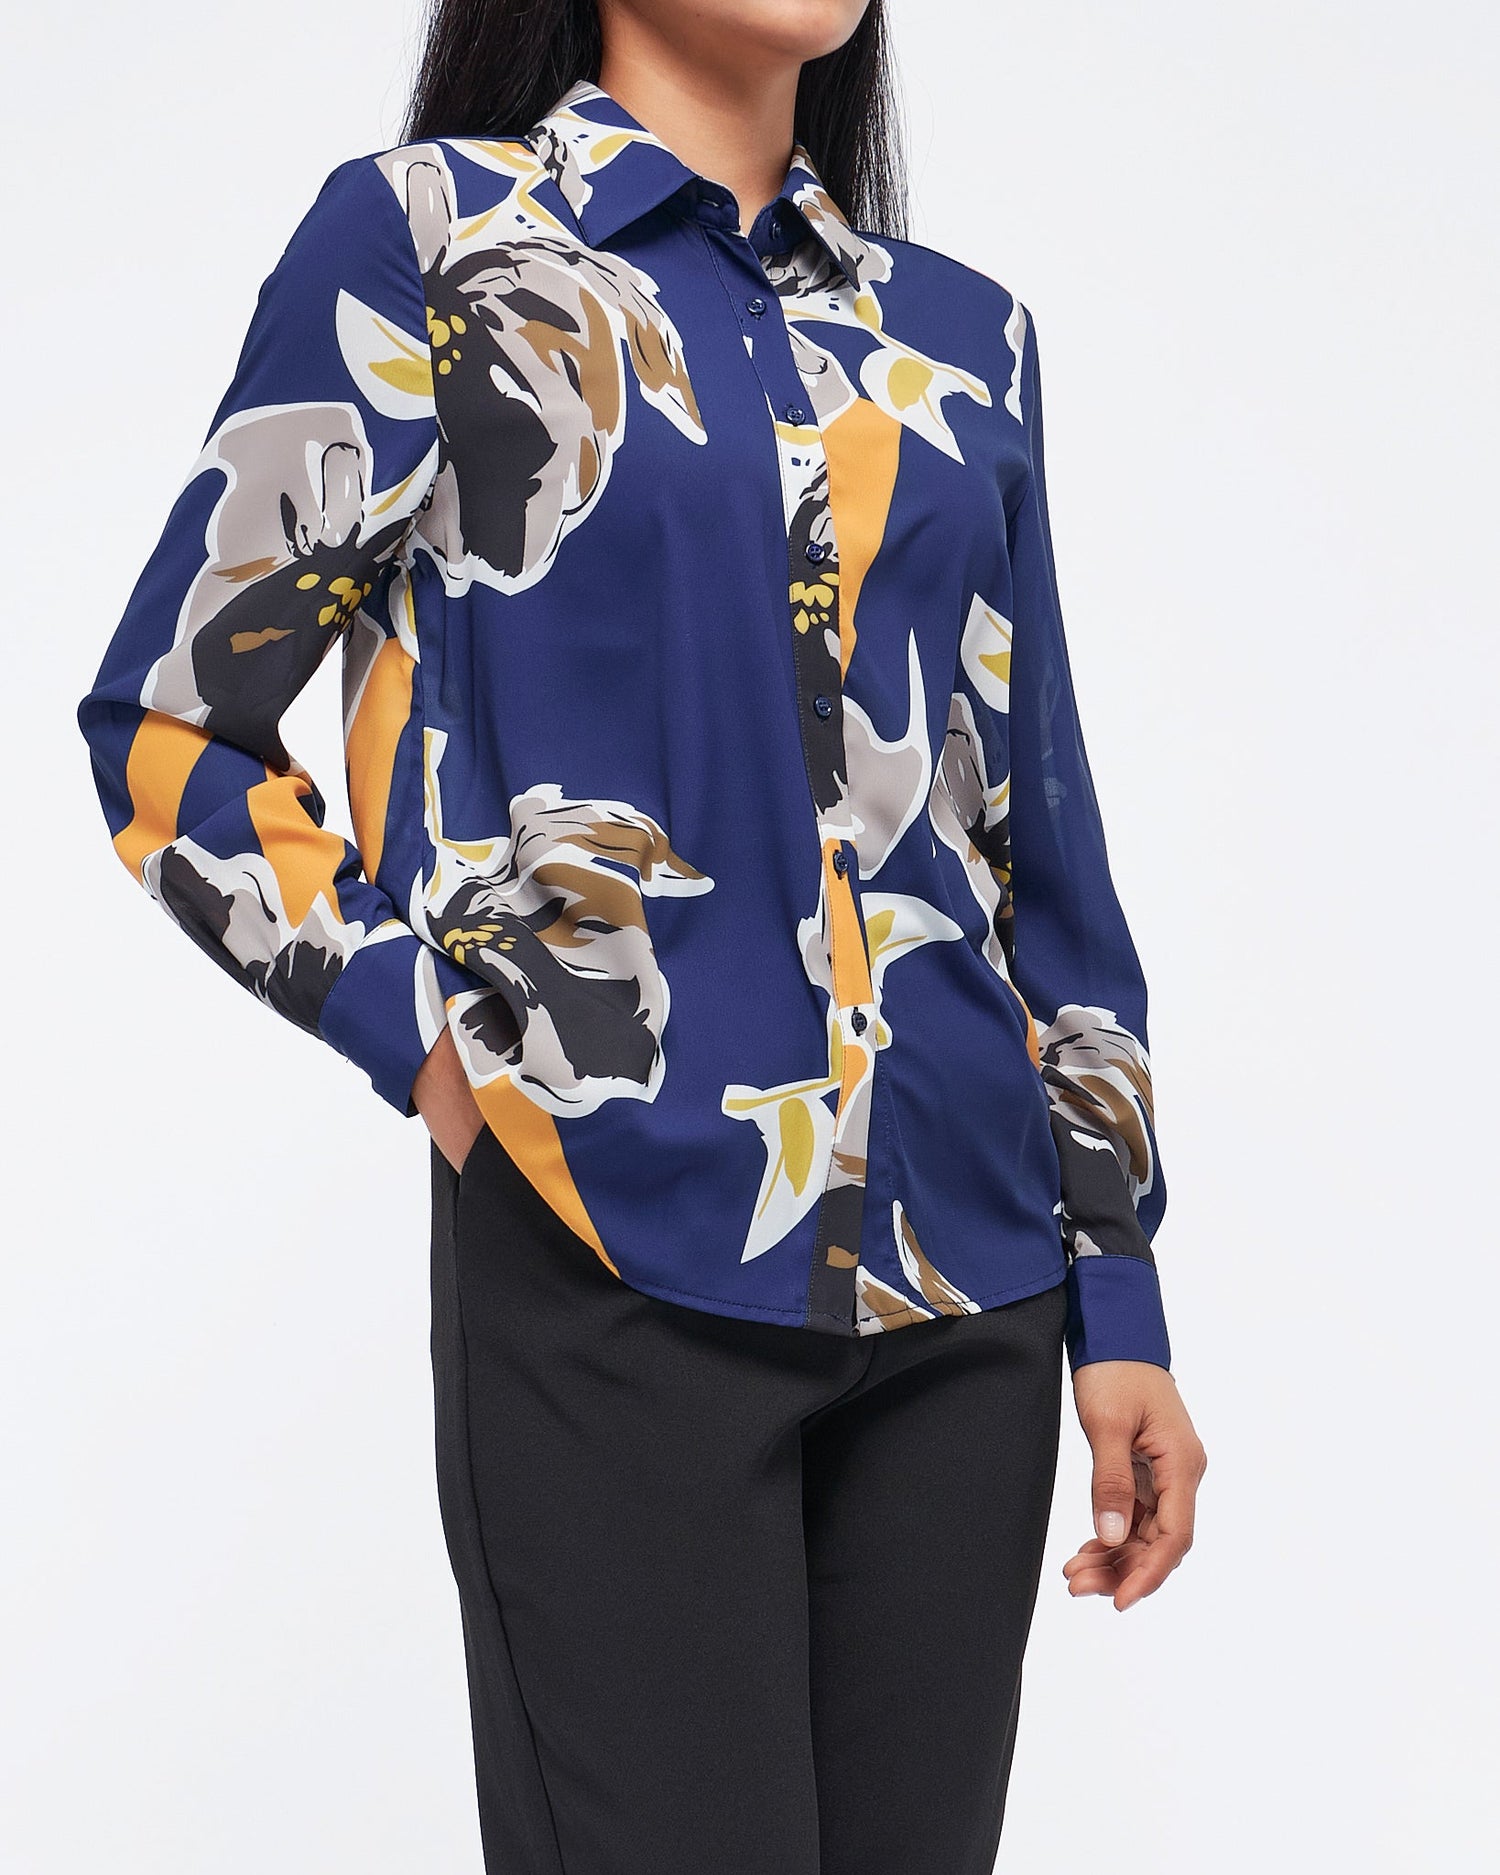 MOI OUTFIT-Floral Over Printed Lady Blouse 22.90